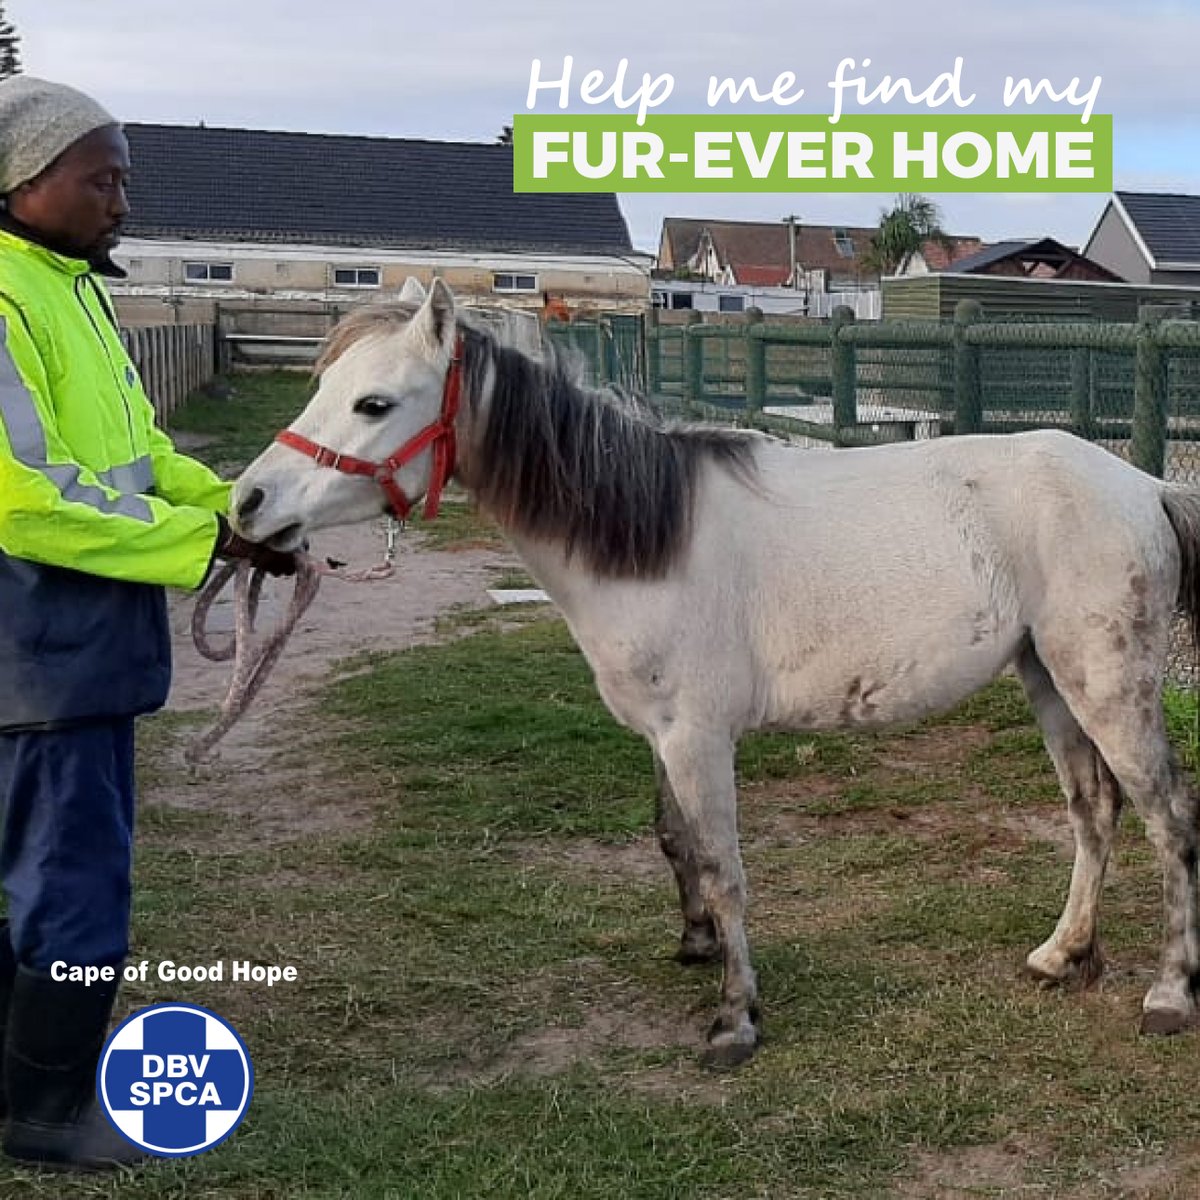 🐴 Phoenix…..rising from the ashes Little Welsh X mare looking for her new home. Make your application to adopt or send an email to hcuadmin@spca-ct.co.za 👇 pulse.ly/aknivgrzlq #AdoptAHorse #HorseFriends #LoveHorses #DreamHorse #AdoptDontShop #CapeSPCA #CapeTown